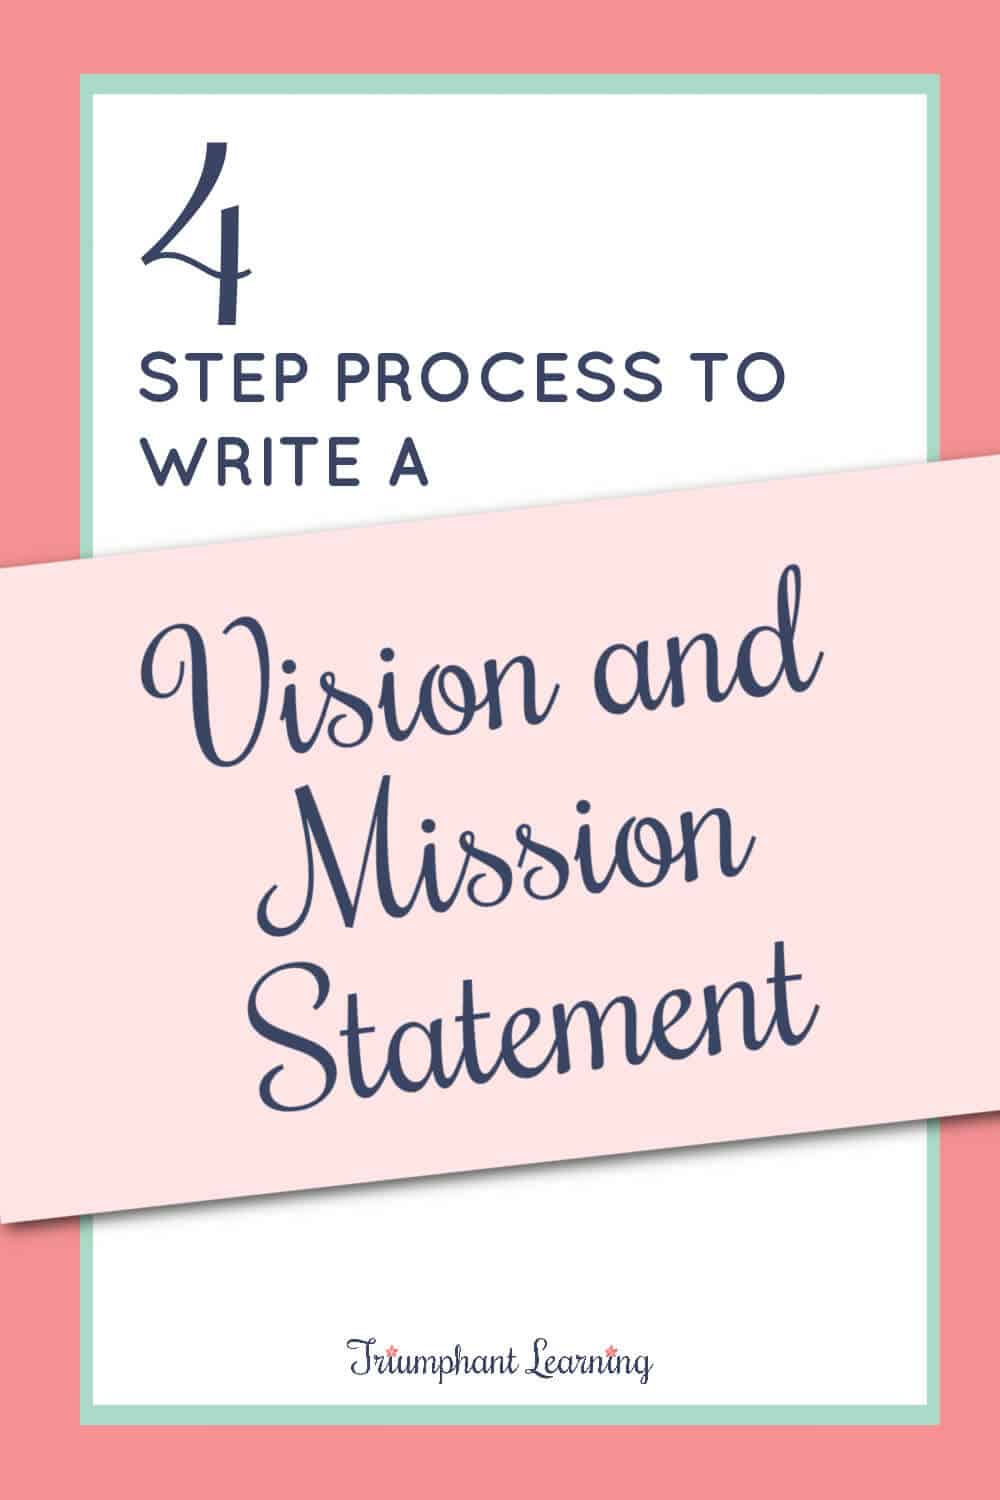 Vision and mission statements help us live with purpose. Learn a four-step process to write a vision and mission statement. via @TriLearning